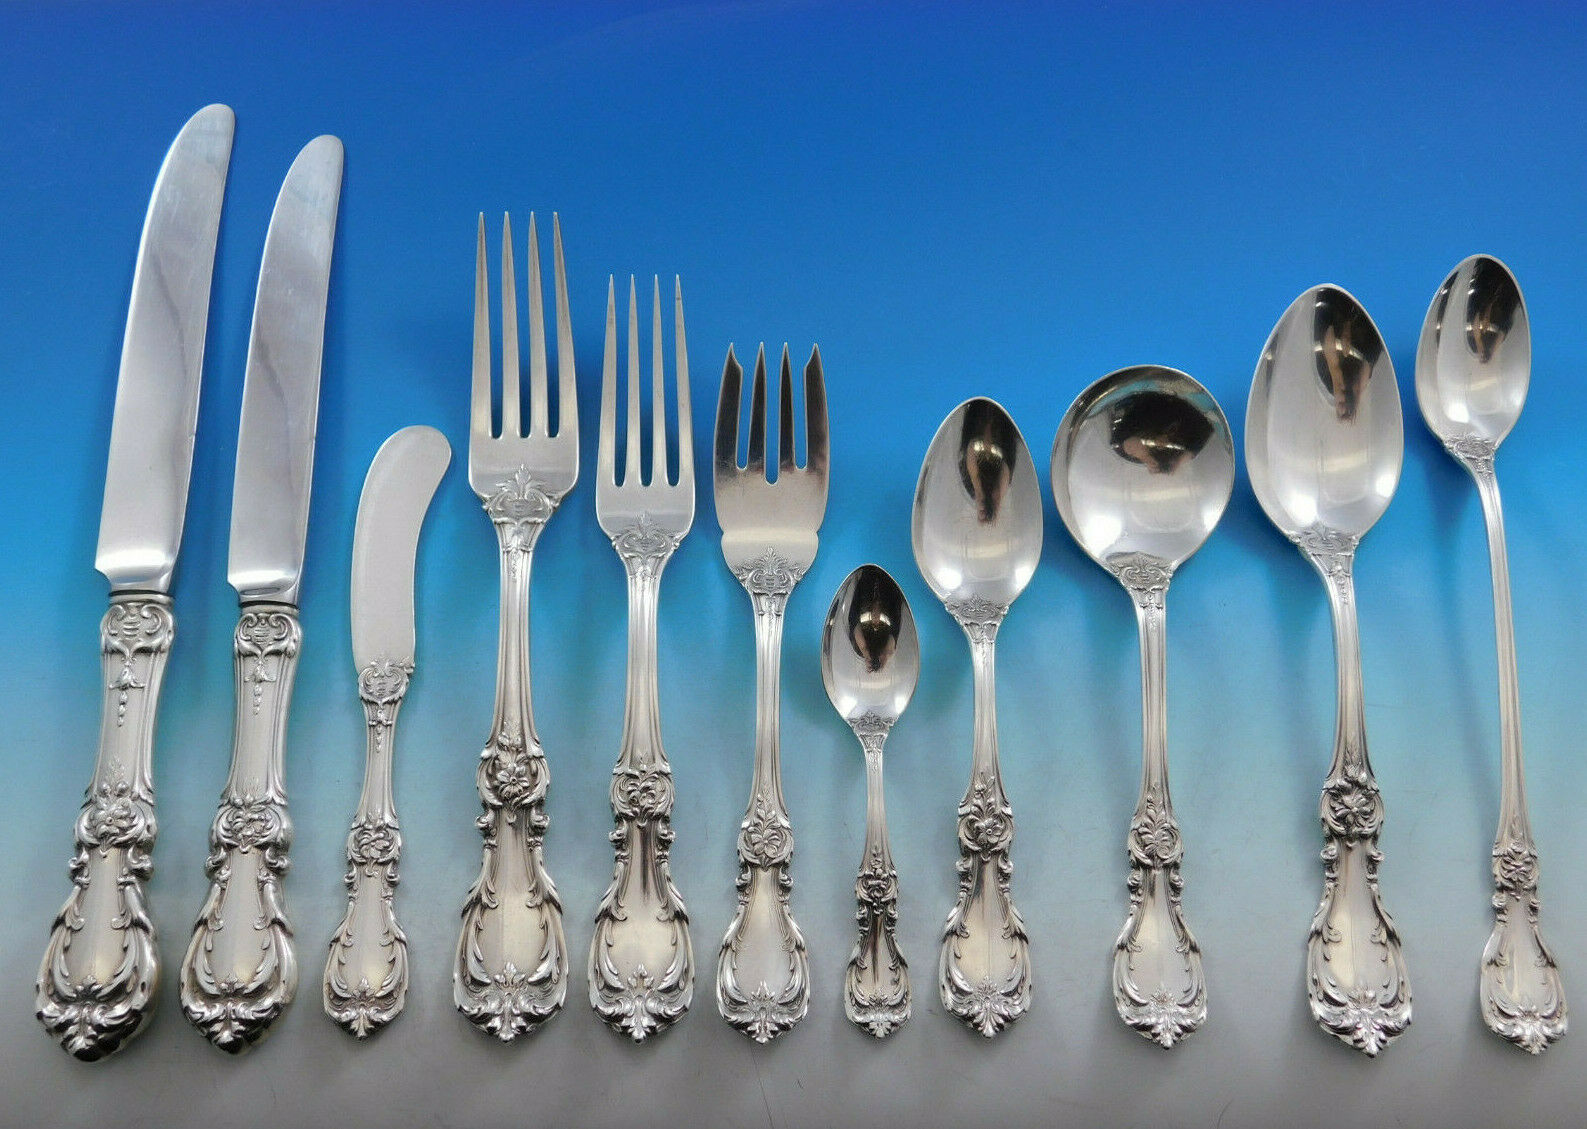 Primary image for Burgundy by Reed & Barton Sterling Silver Flatware Set 12 Service 150 pcs Dinner